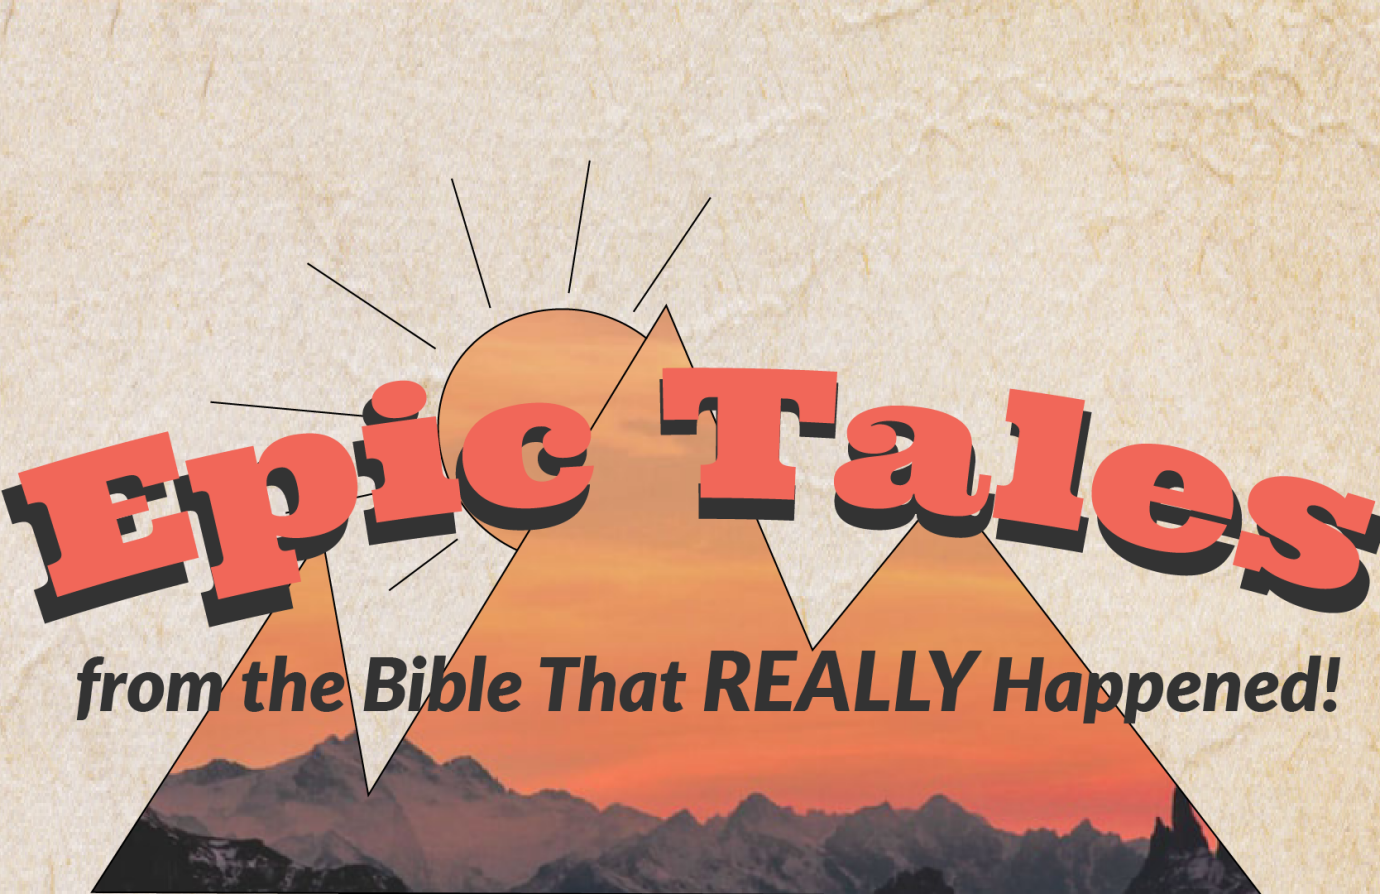 EPIC TALES From The Bible That Really Happened!